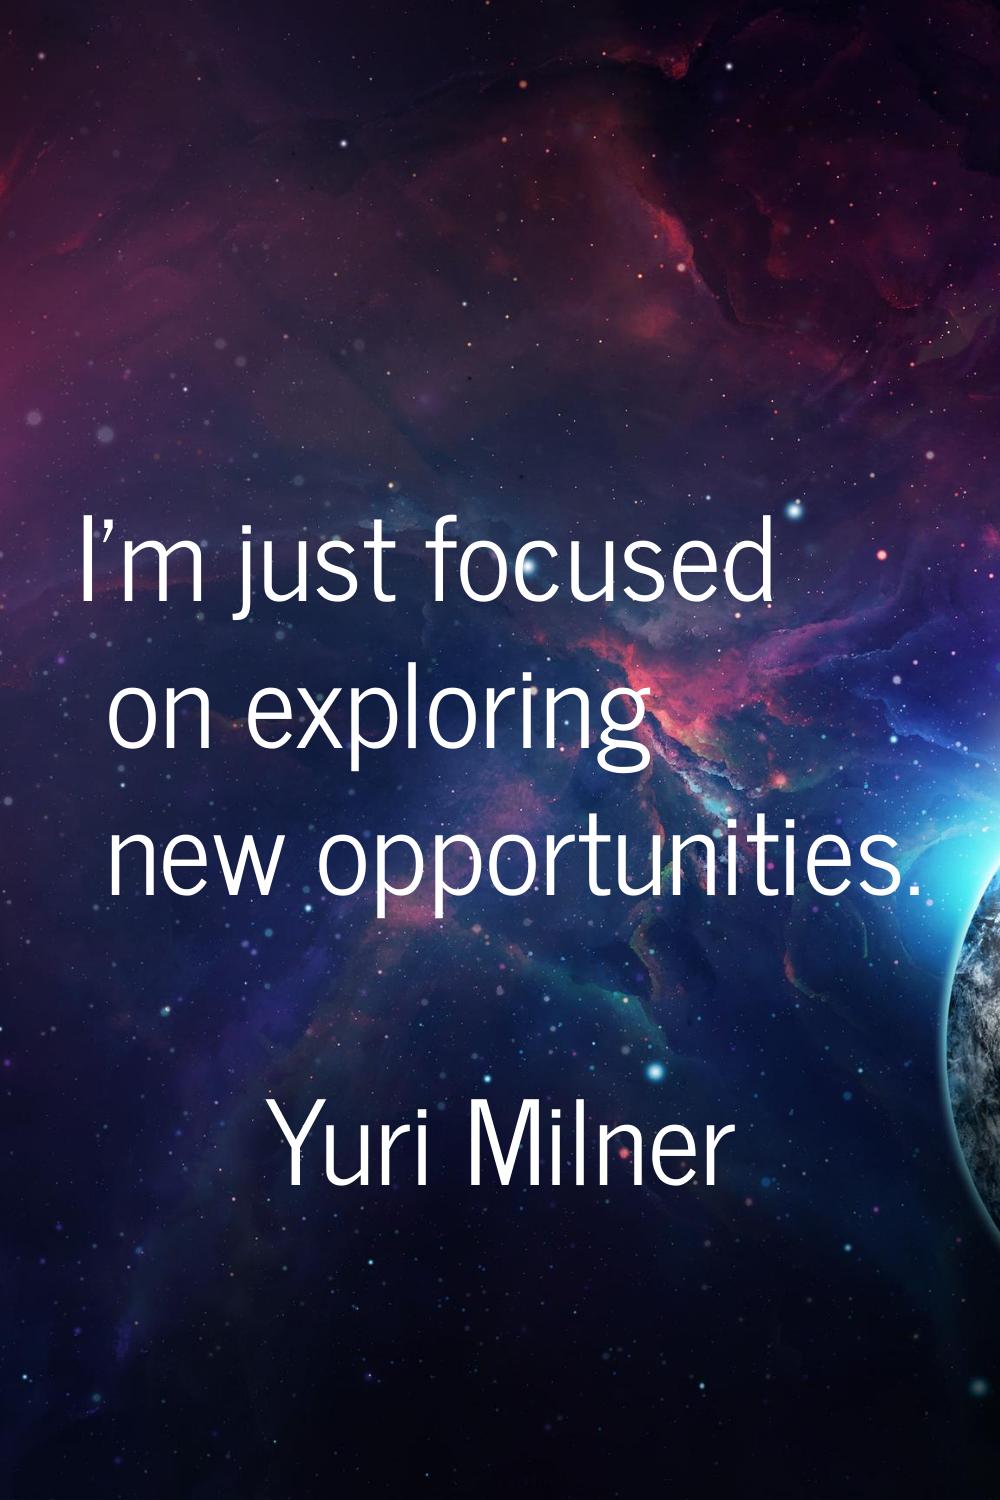 I'm just focused on exploring new opportunities.